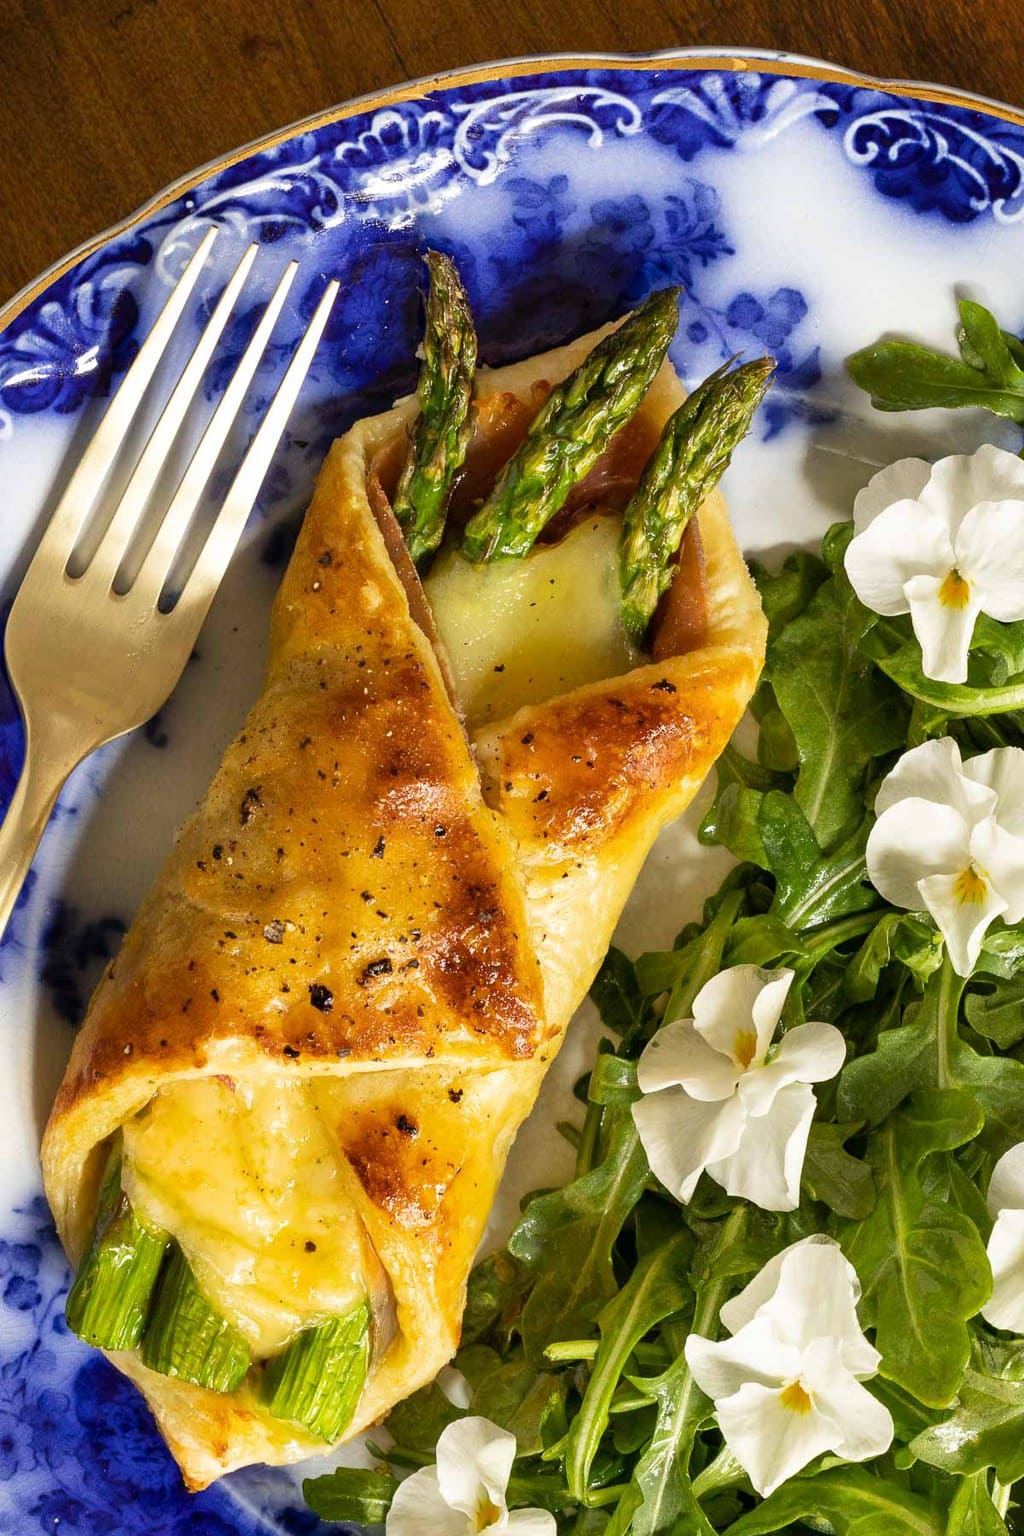 Vertical extreme closeup photo of a Honey-Glazed Asparagus Prosciutto Puff Pastry Wrap with an arugula side salad decorated with edible pansy flowers.